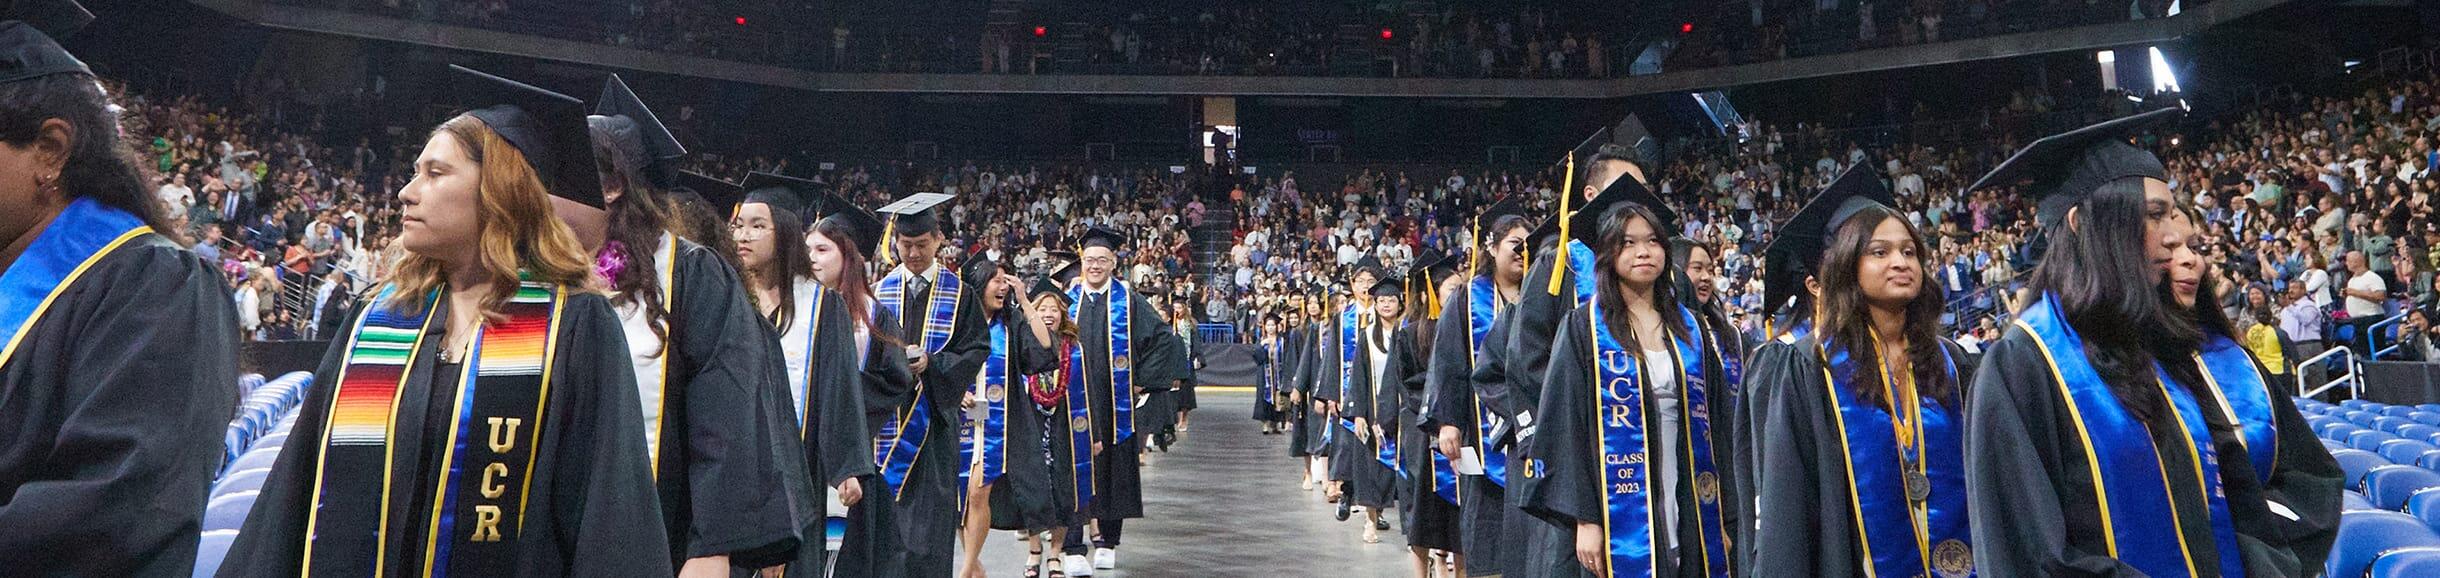 UCR graduates at the Toyota Arena Commencement